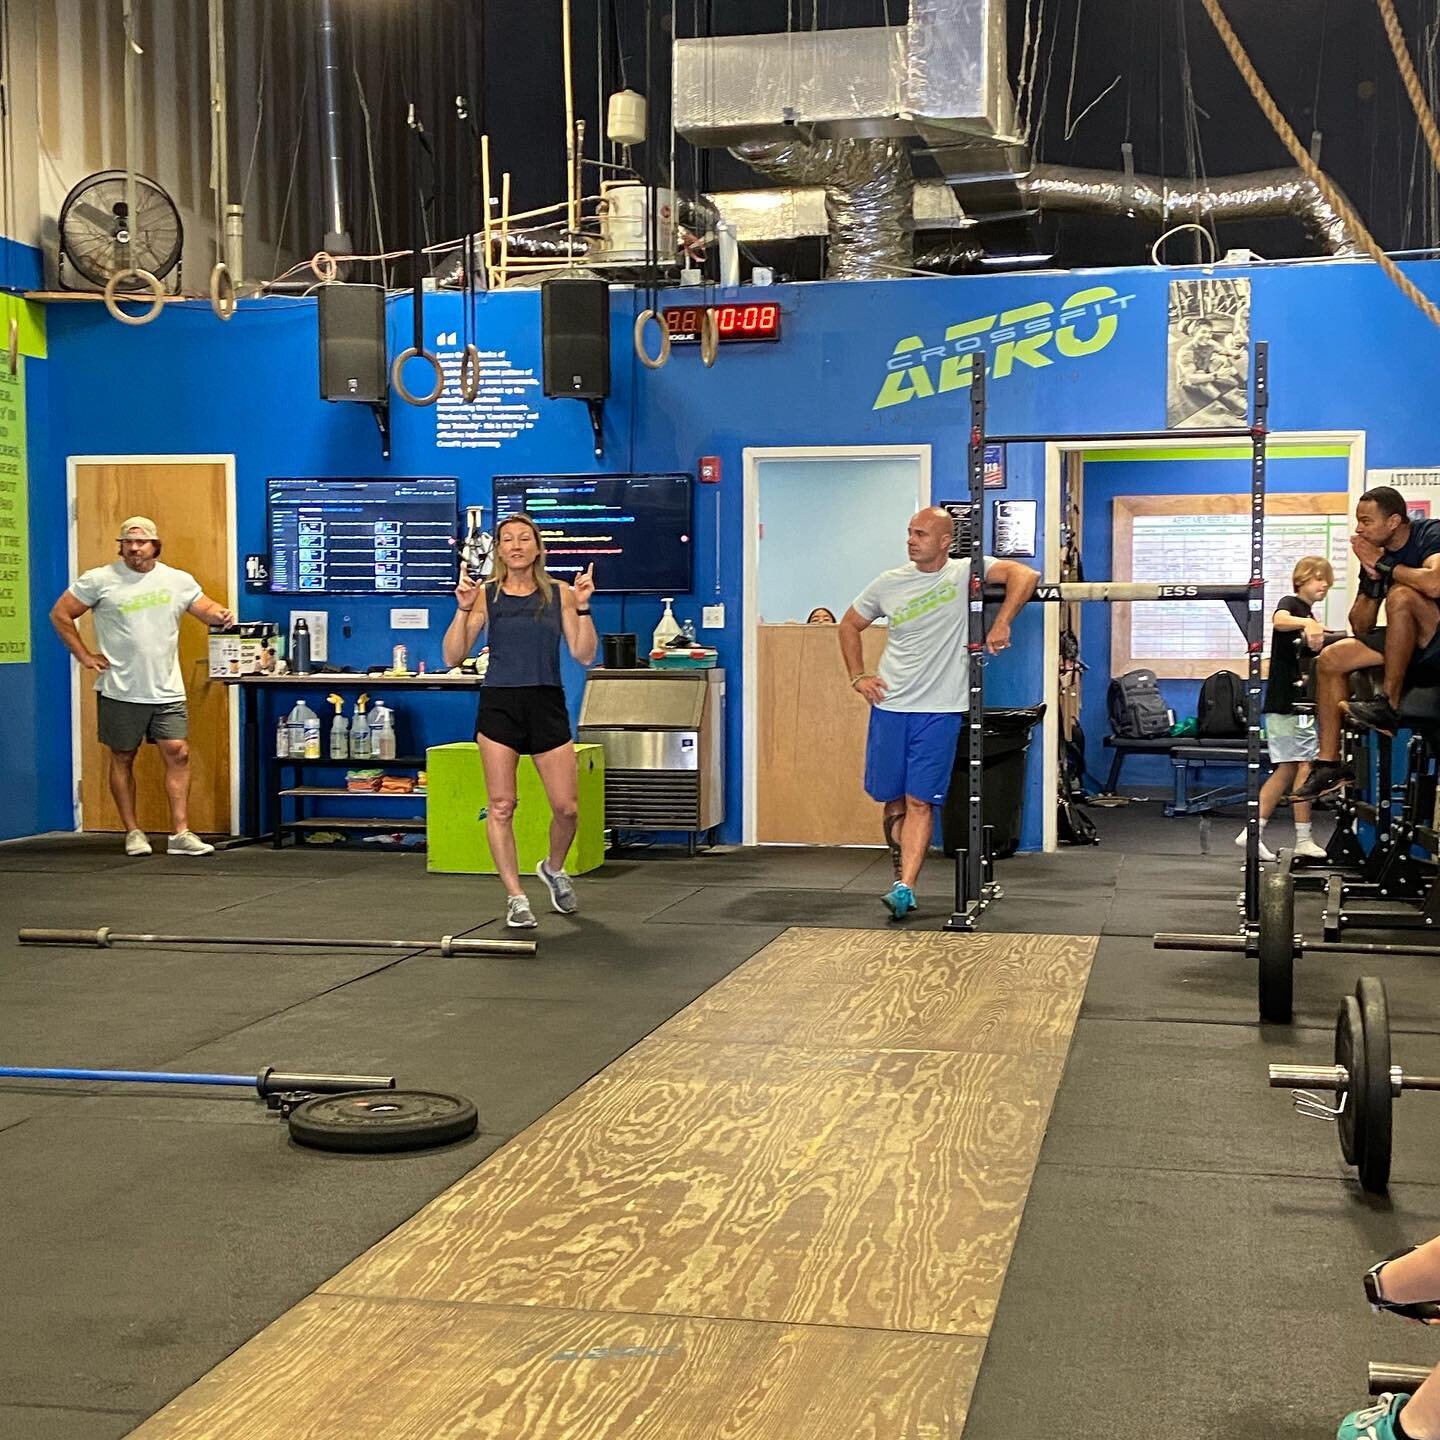 Thank you to the Athletes that participated in the Aero Nutrition Challenge. For those that couldn&rsquo;t attend this morning, the athletes lost a cumulative 77 pounds, learned how to eat properly before and after workouts and have some delicious he